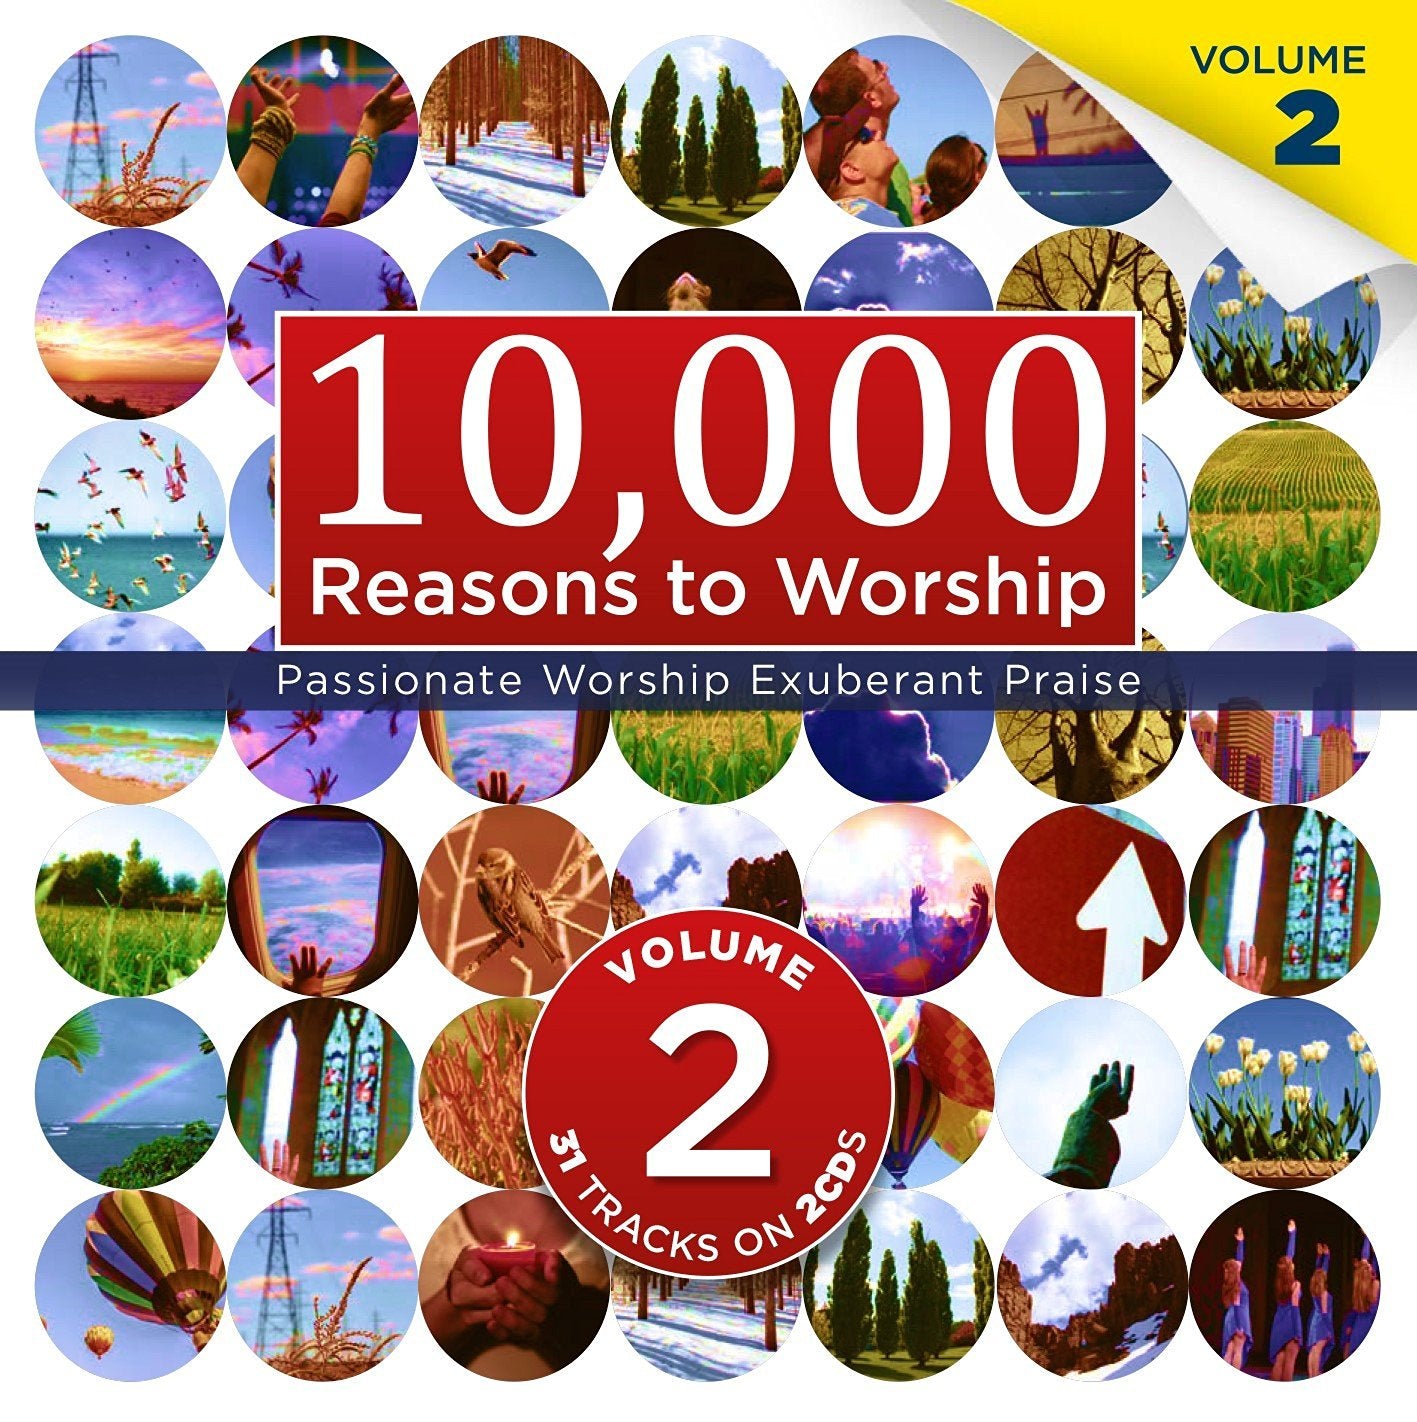 Image of 10,000 Reasons to Worship Vol. 2 CD other